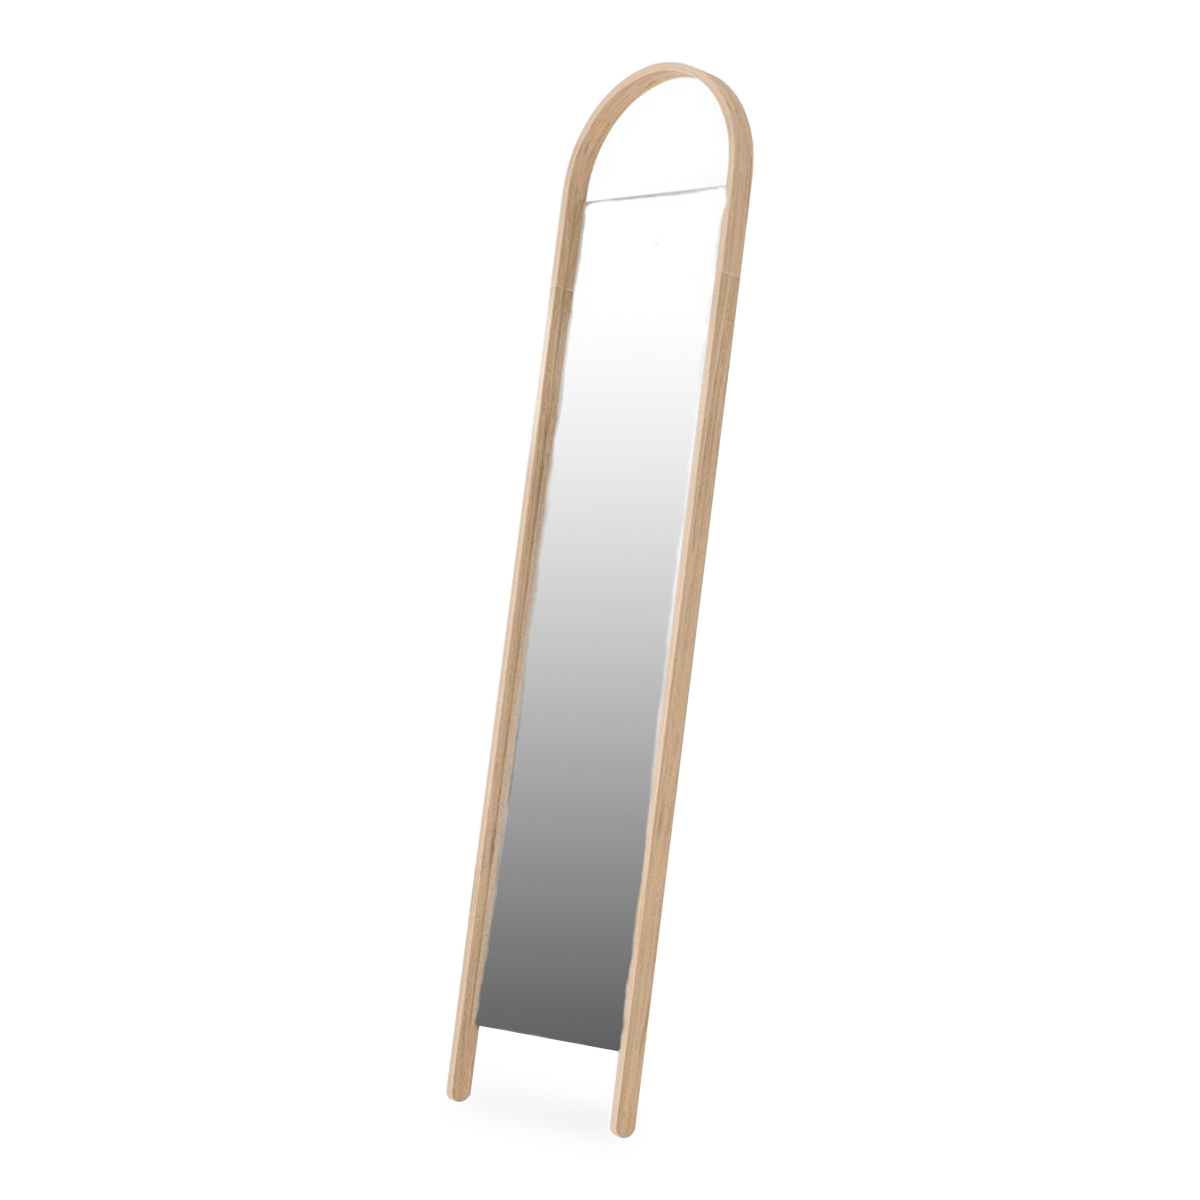 This Bellwood Leaning Mirror features a soft arched wood frame made from renewable wood.